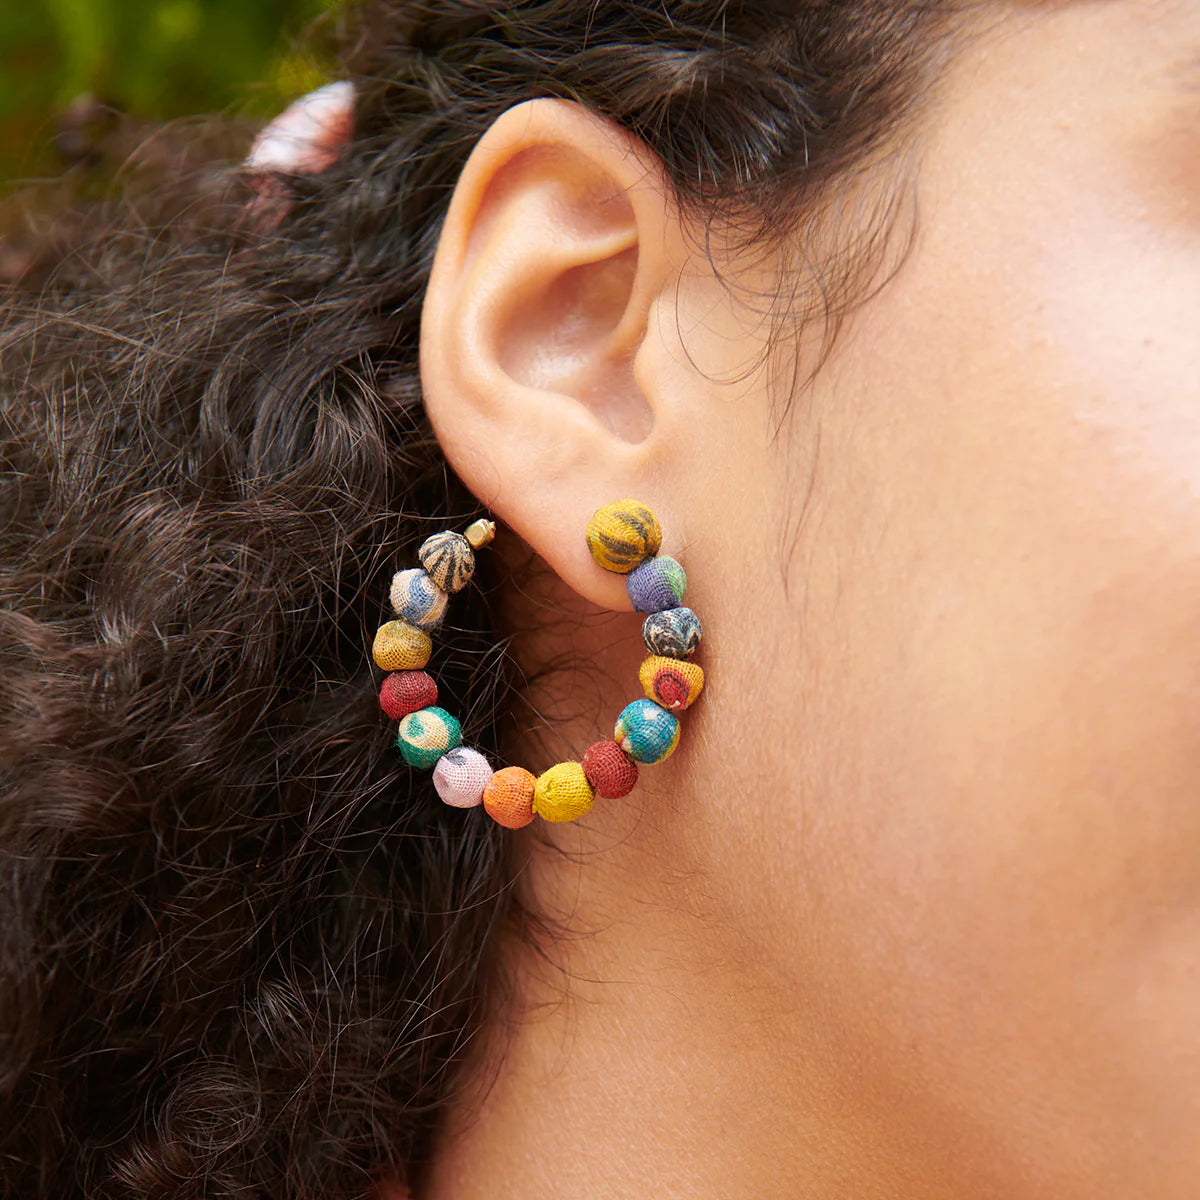 Angelco Accessories flatlay kantha hoop earrings  - close up worn by model